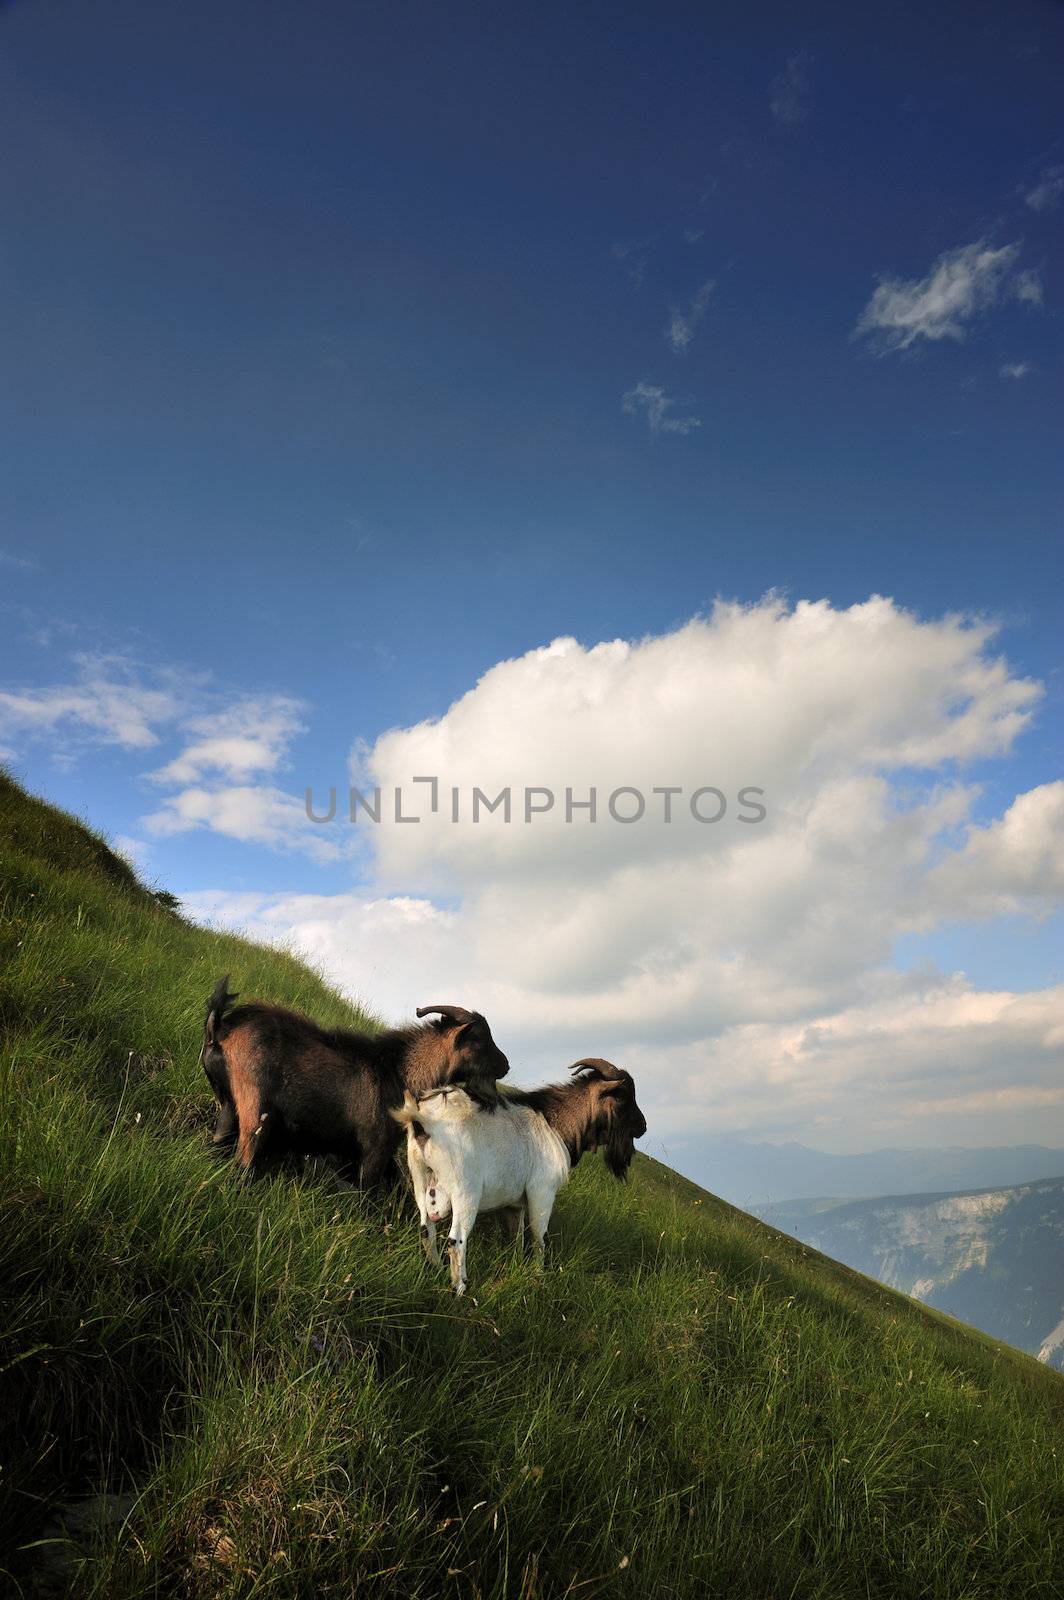 a pair of goats on a grassy hillside in the mountains admiring the landscape